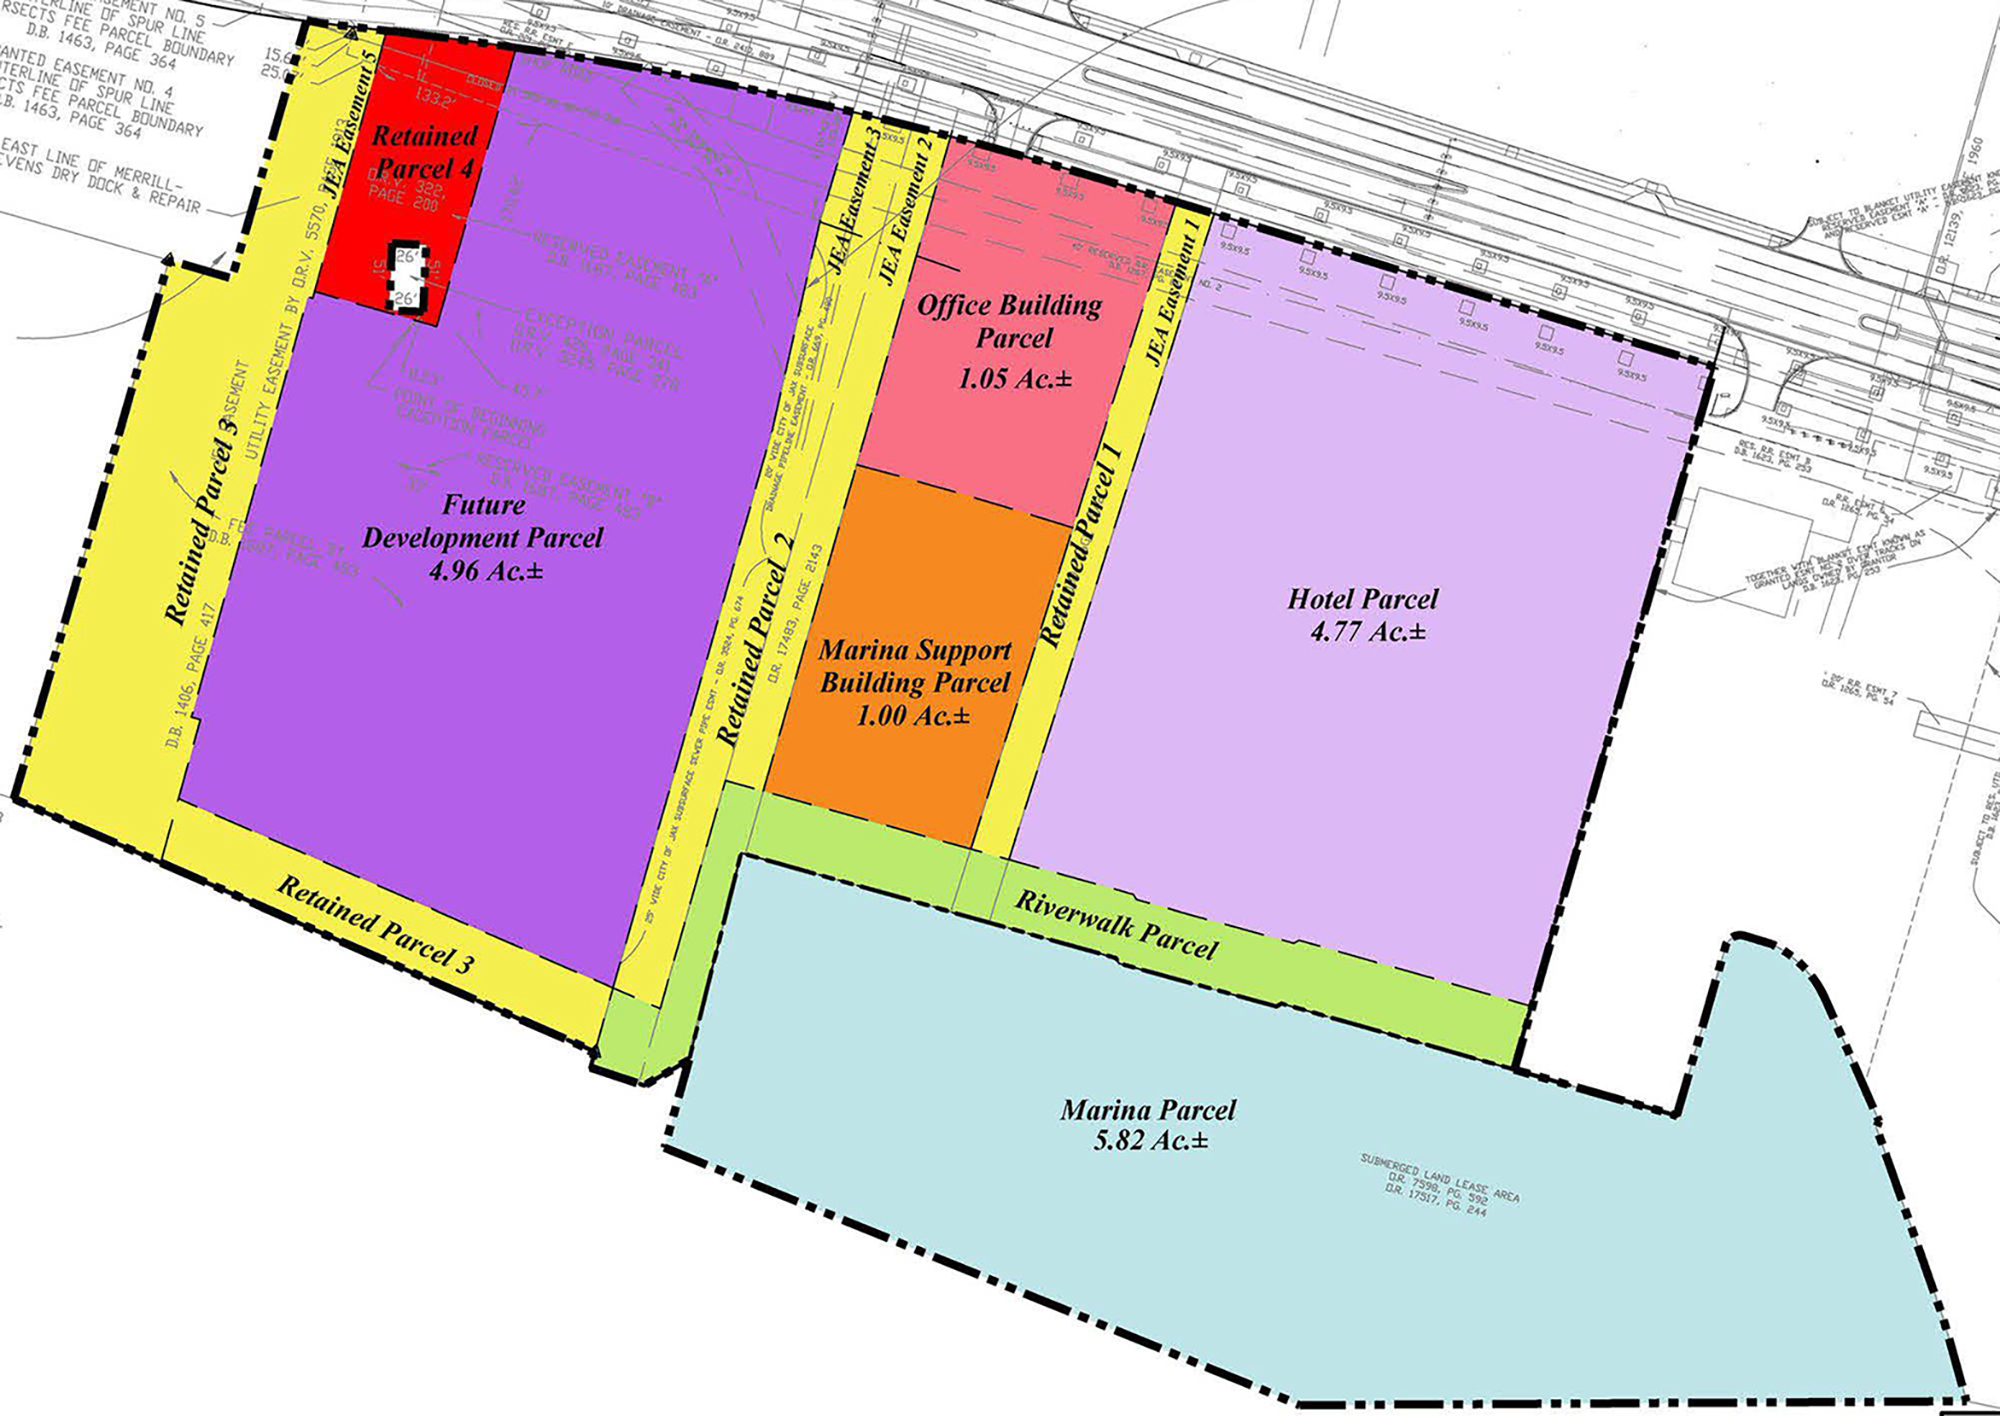 A site plan of the Four Seasons development area south of TIAA Bank Field.